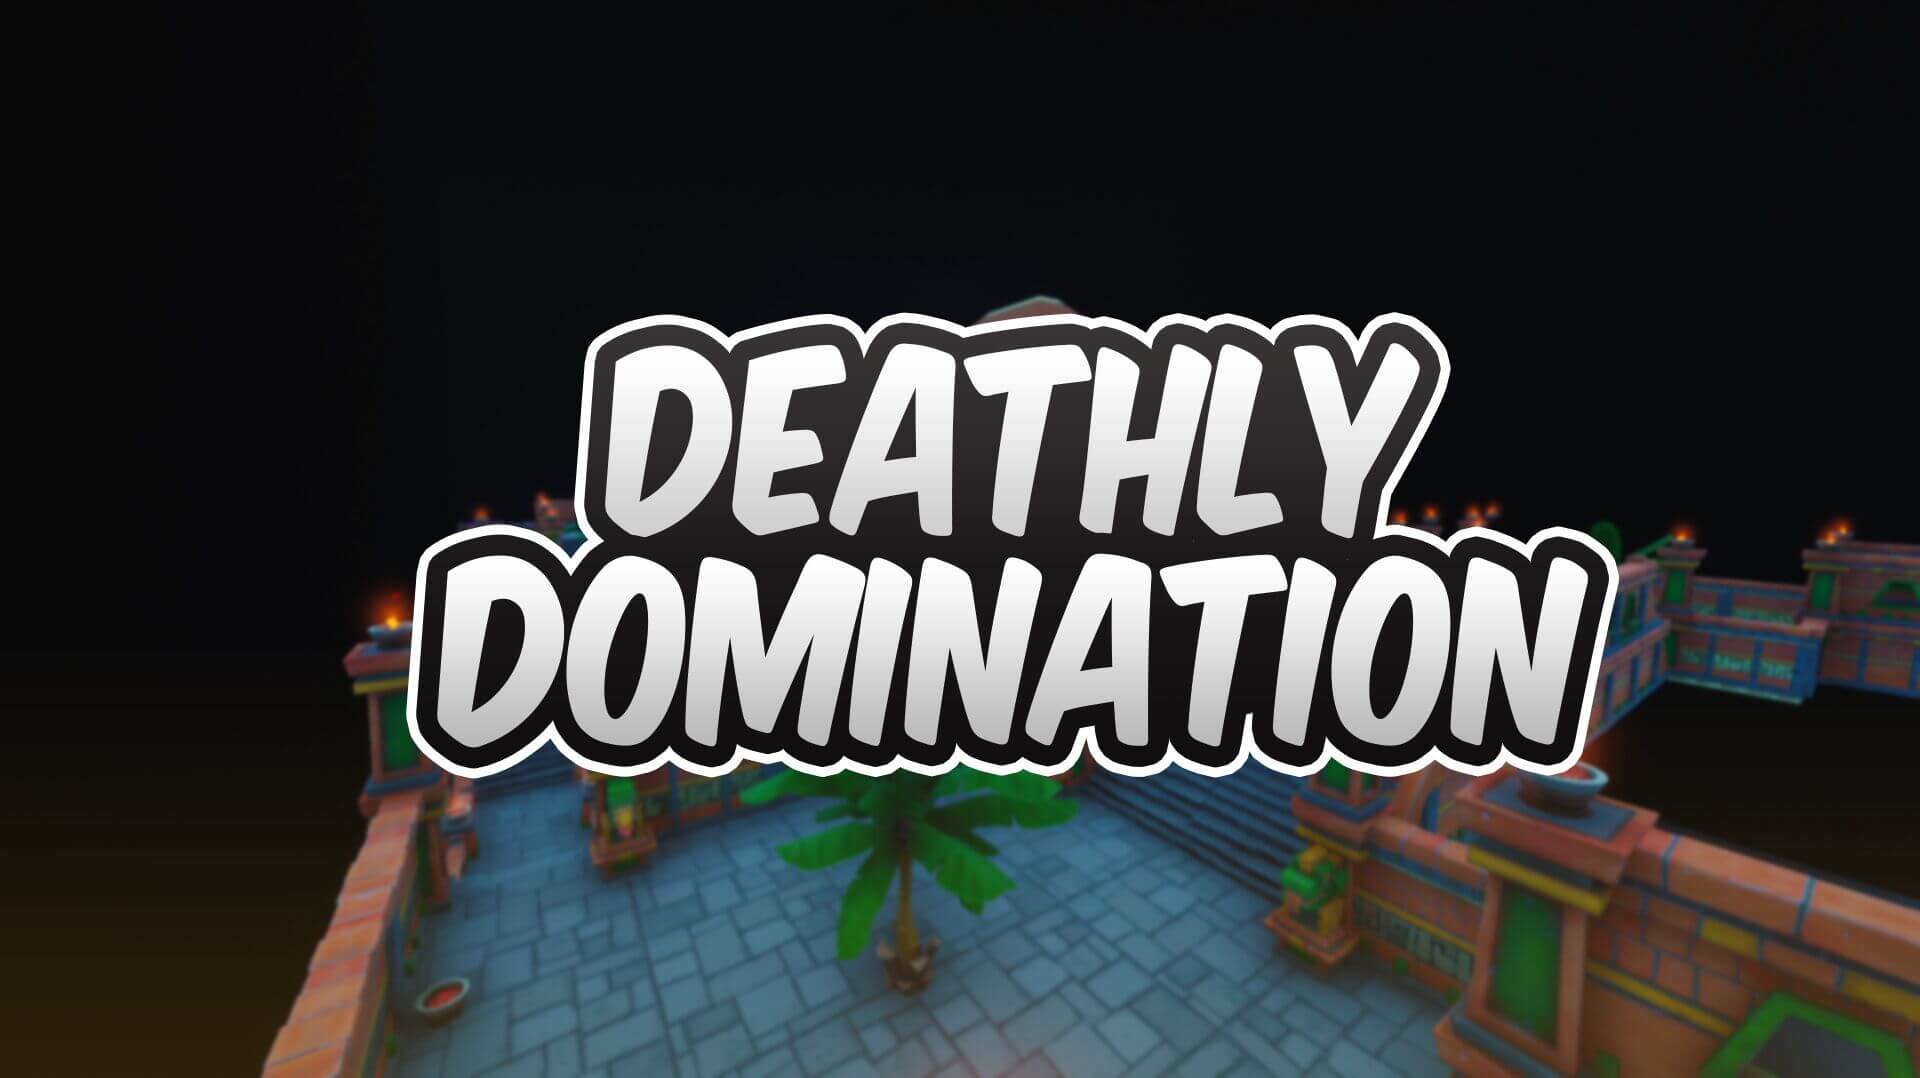 DEATHLY DOMINATION